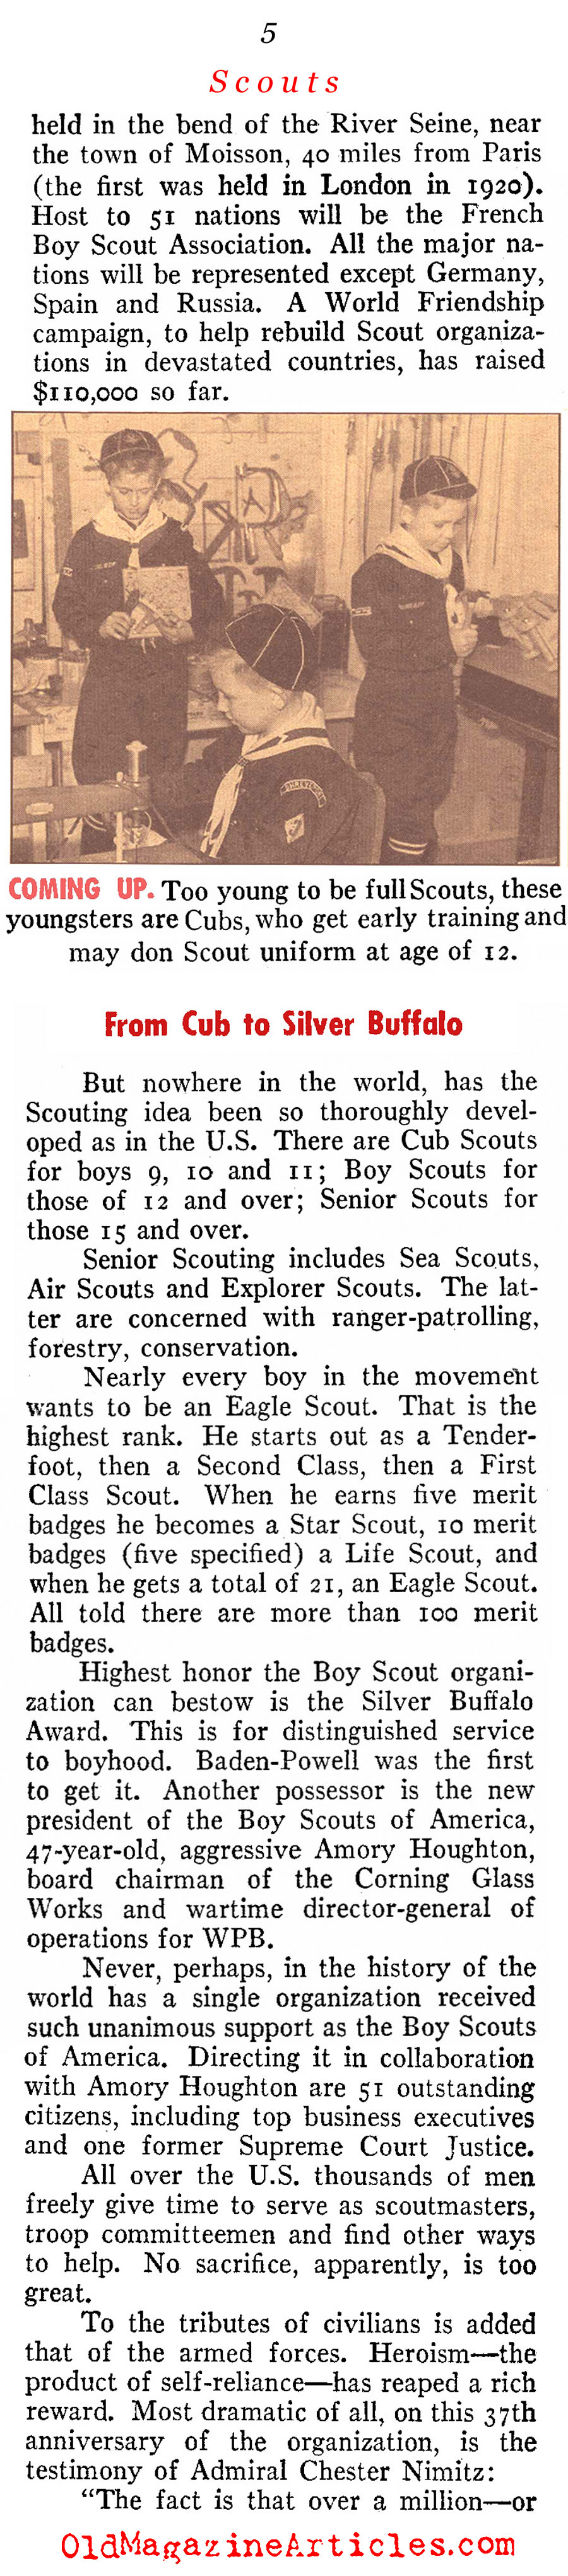 The Boy Scouts of America (Pathfinder Magazine, 1947)